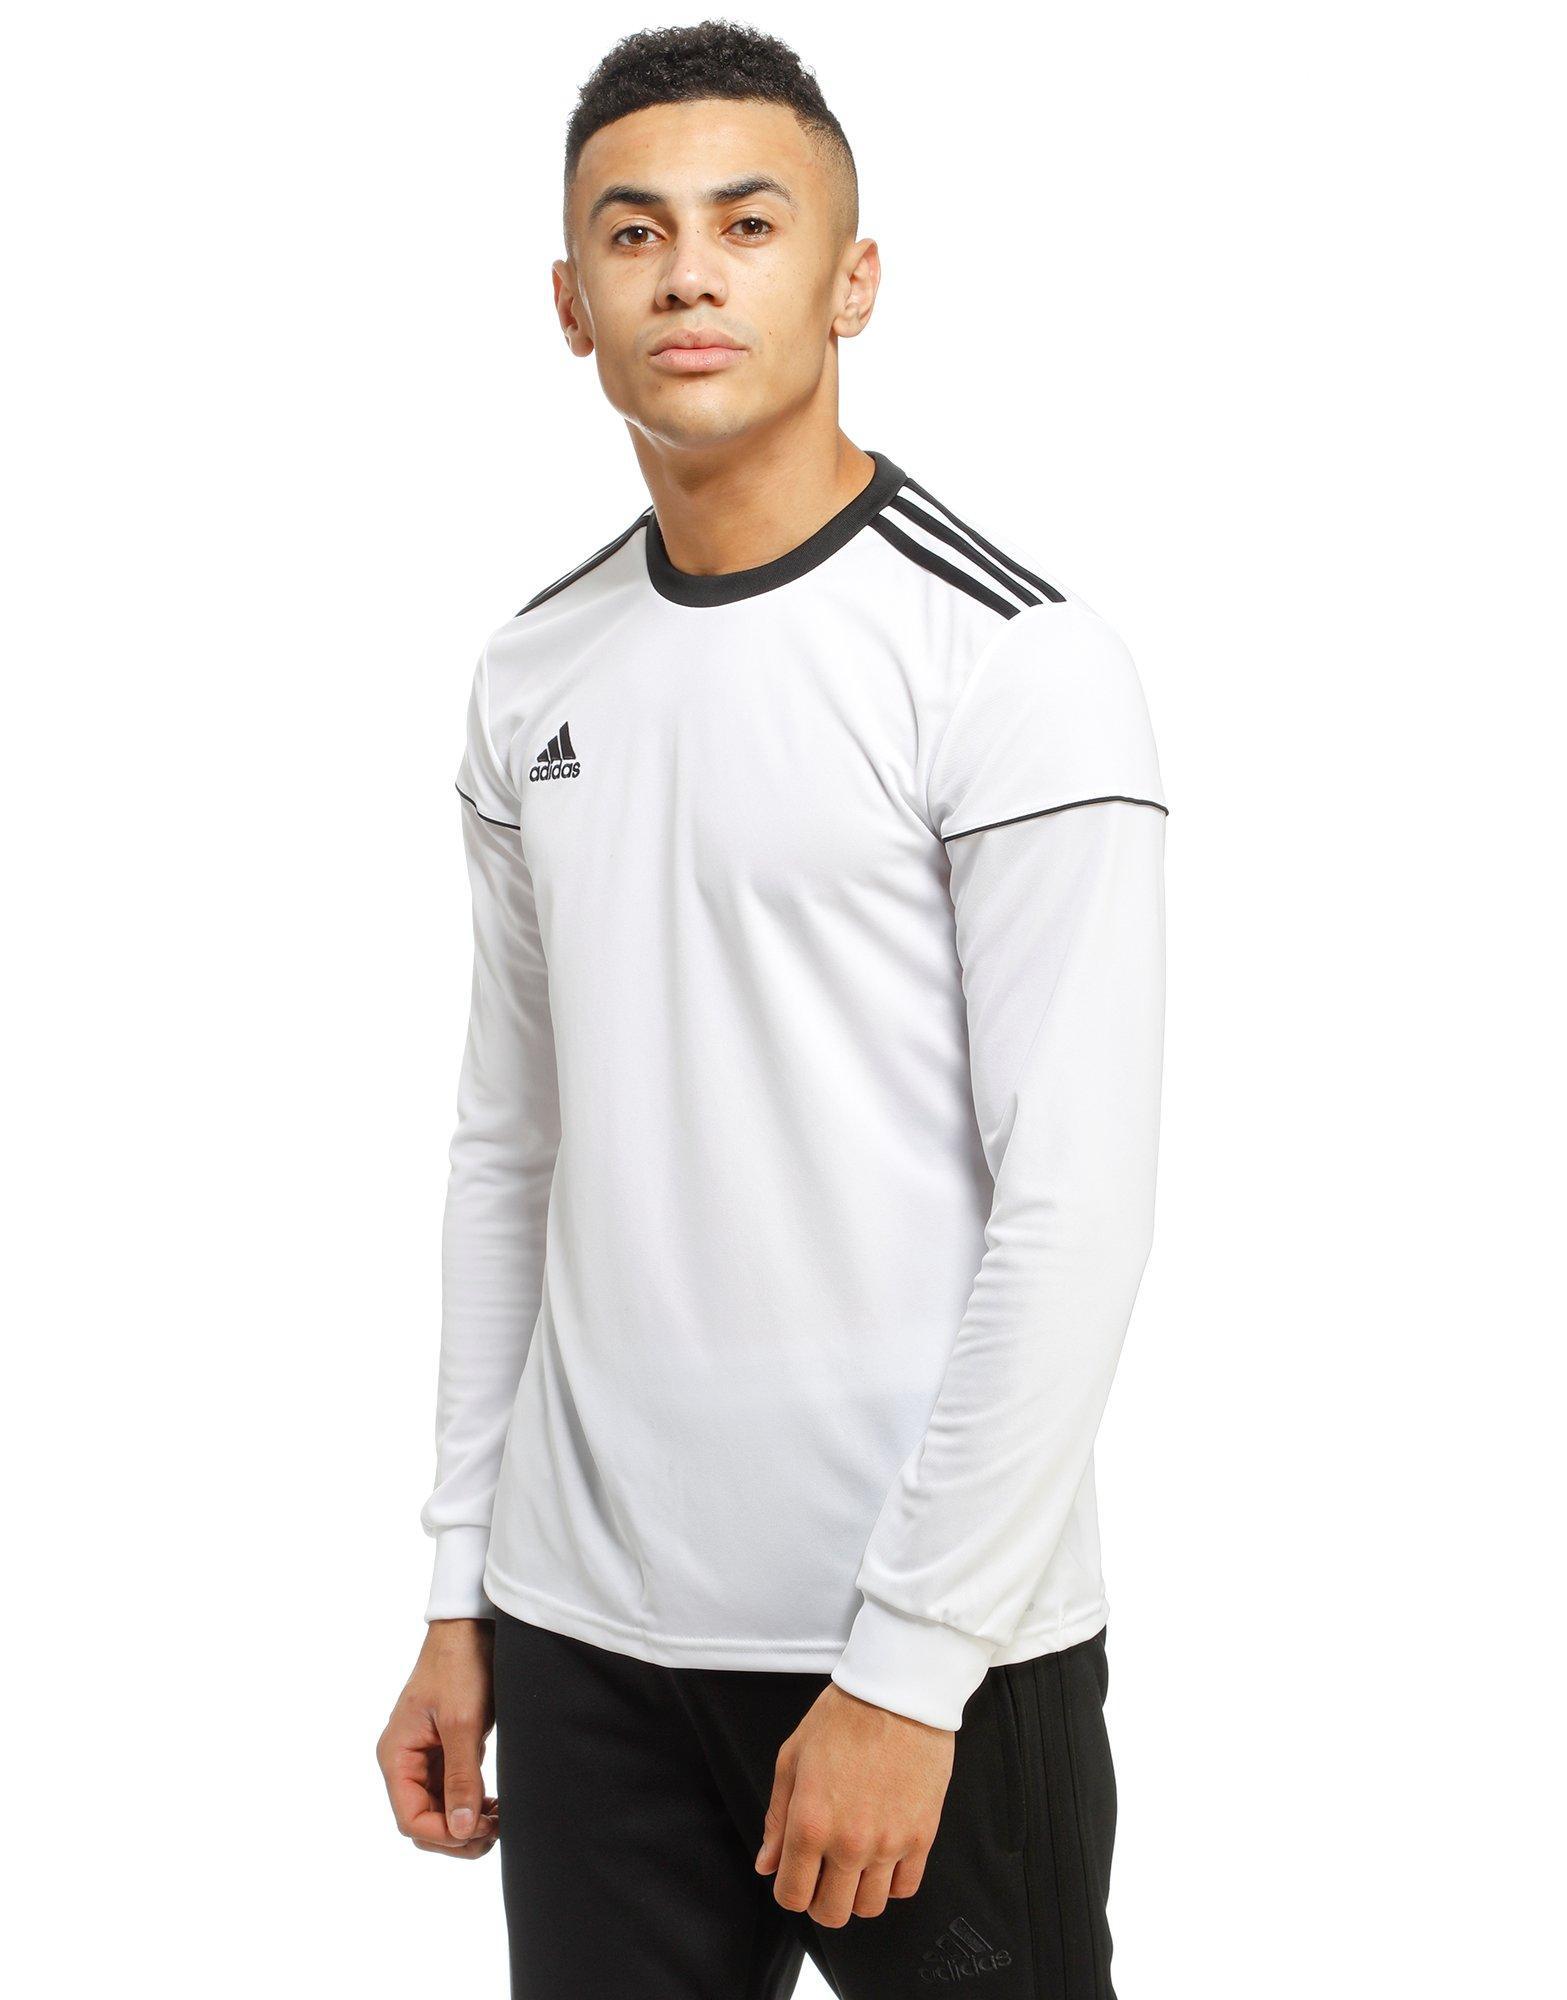 Lyst - Adidas Squad 15 Long Sleeve T-shirt in White for Men